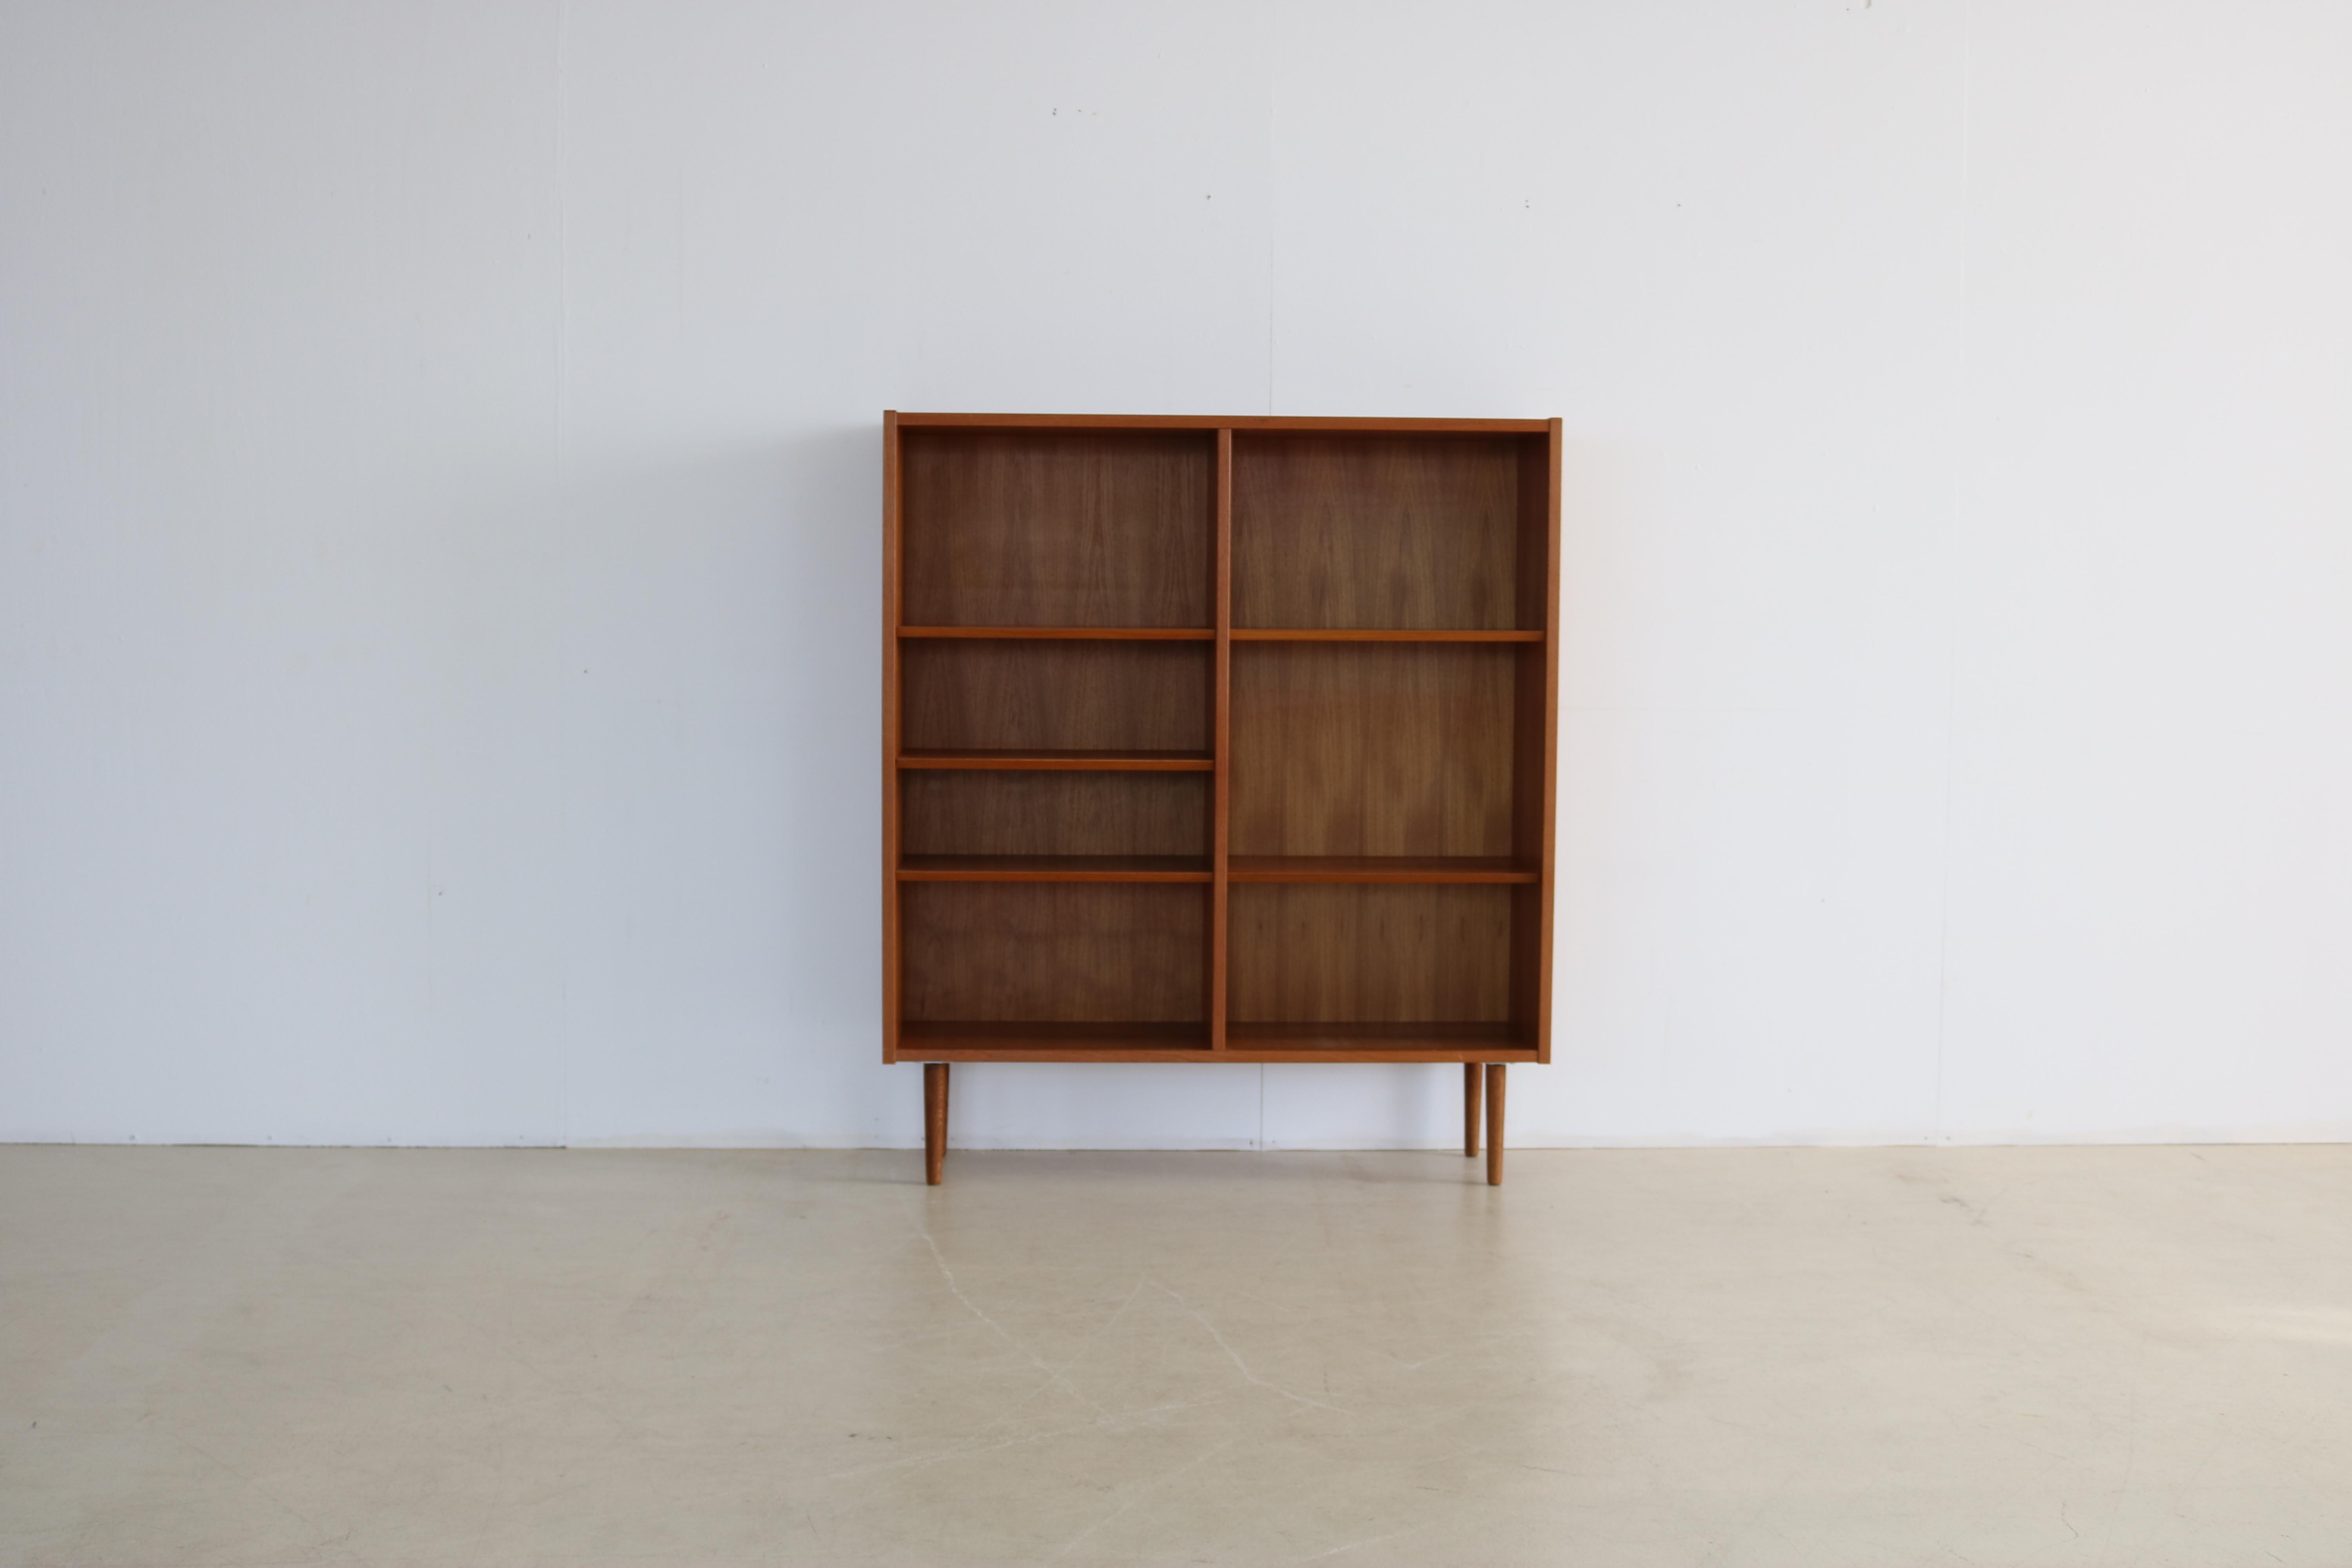 Vintage bookcase cabinet 60s Hundevad.

Period 60's
Designs Hundevad Denmark
Conditions good light signs of use
Size 125 x 108 x 31 (H x W x D).

Details teak;

Article number 1900.
 